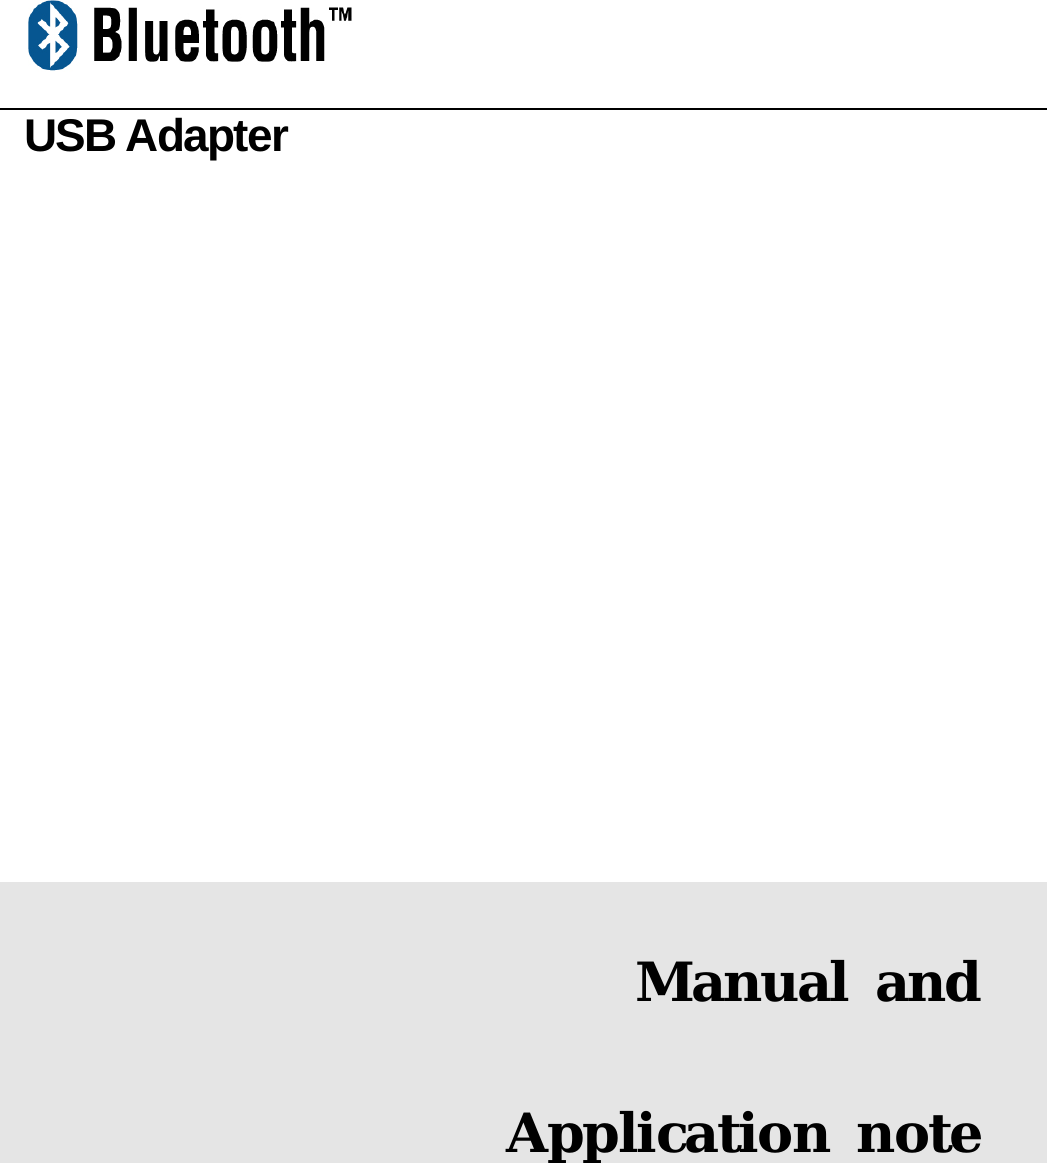  USB Adapter          Manual and Application note3.0